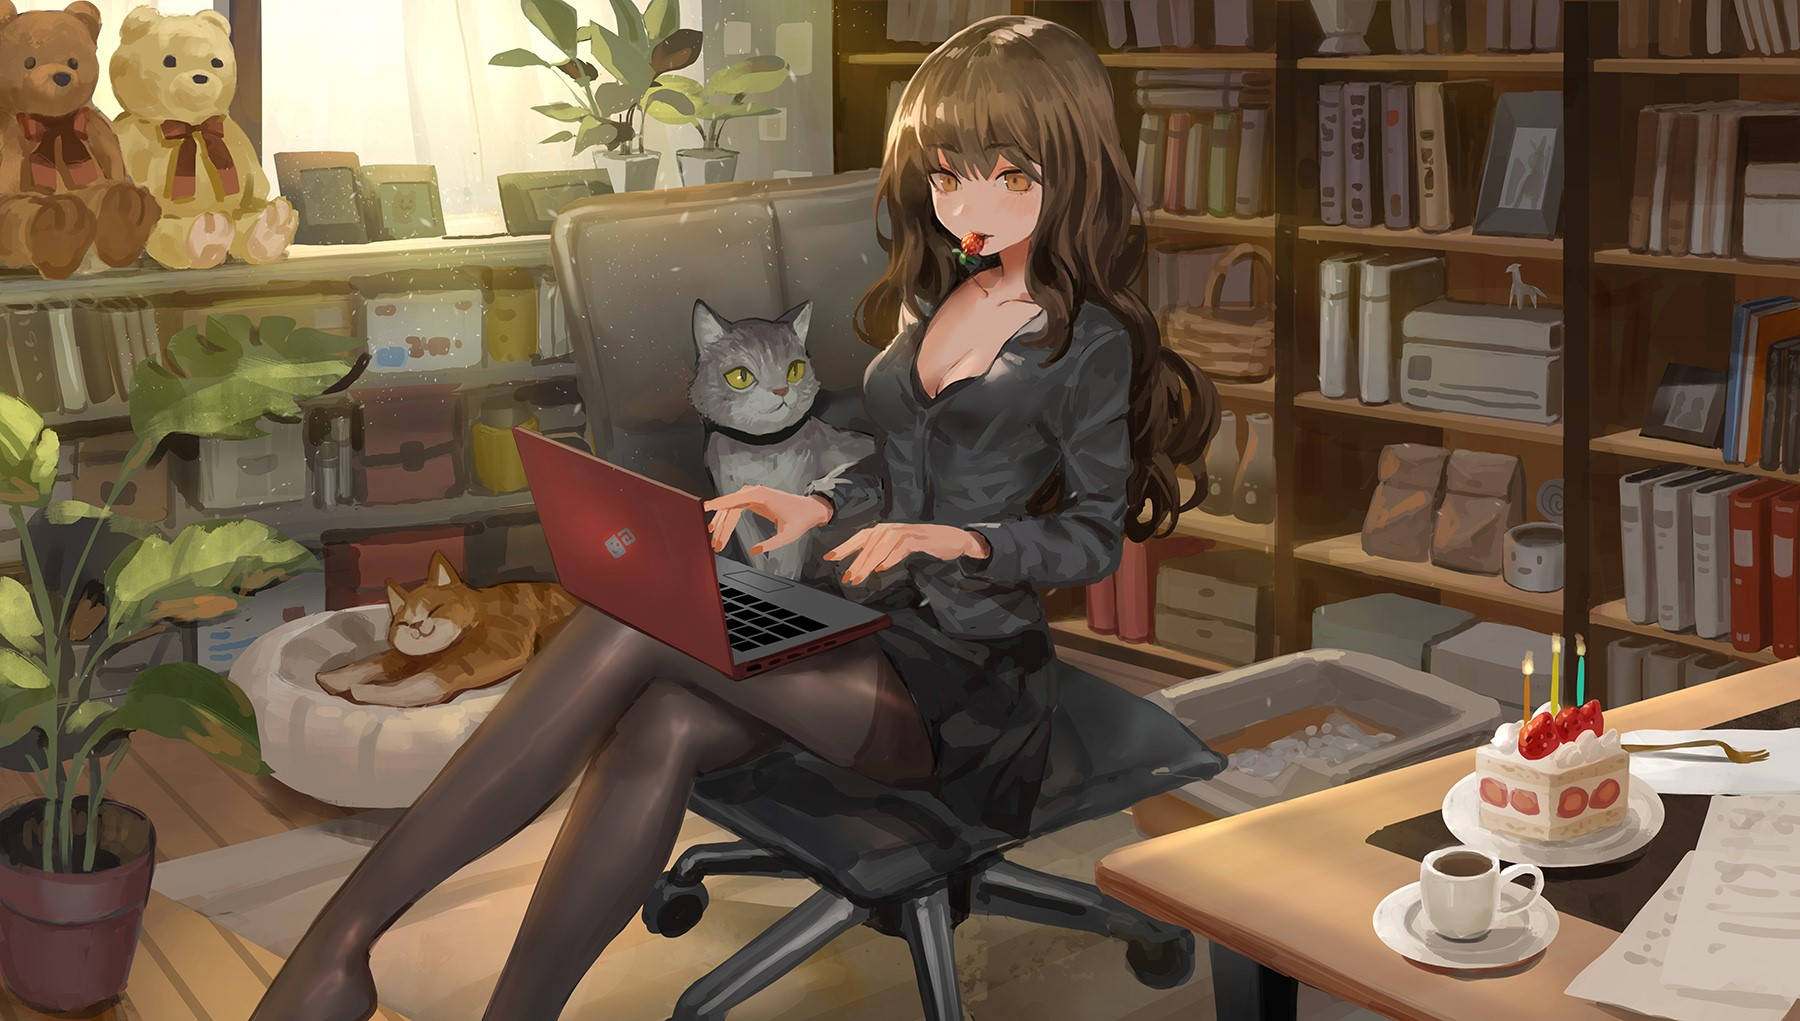 Sexy Goth Anime Girl Typing On Laptop Wallpaper